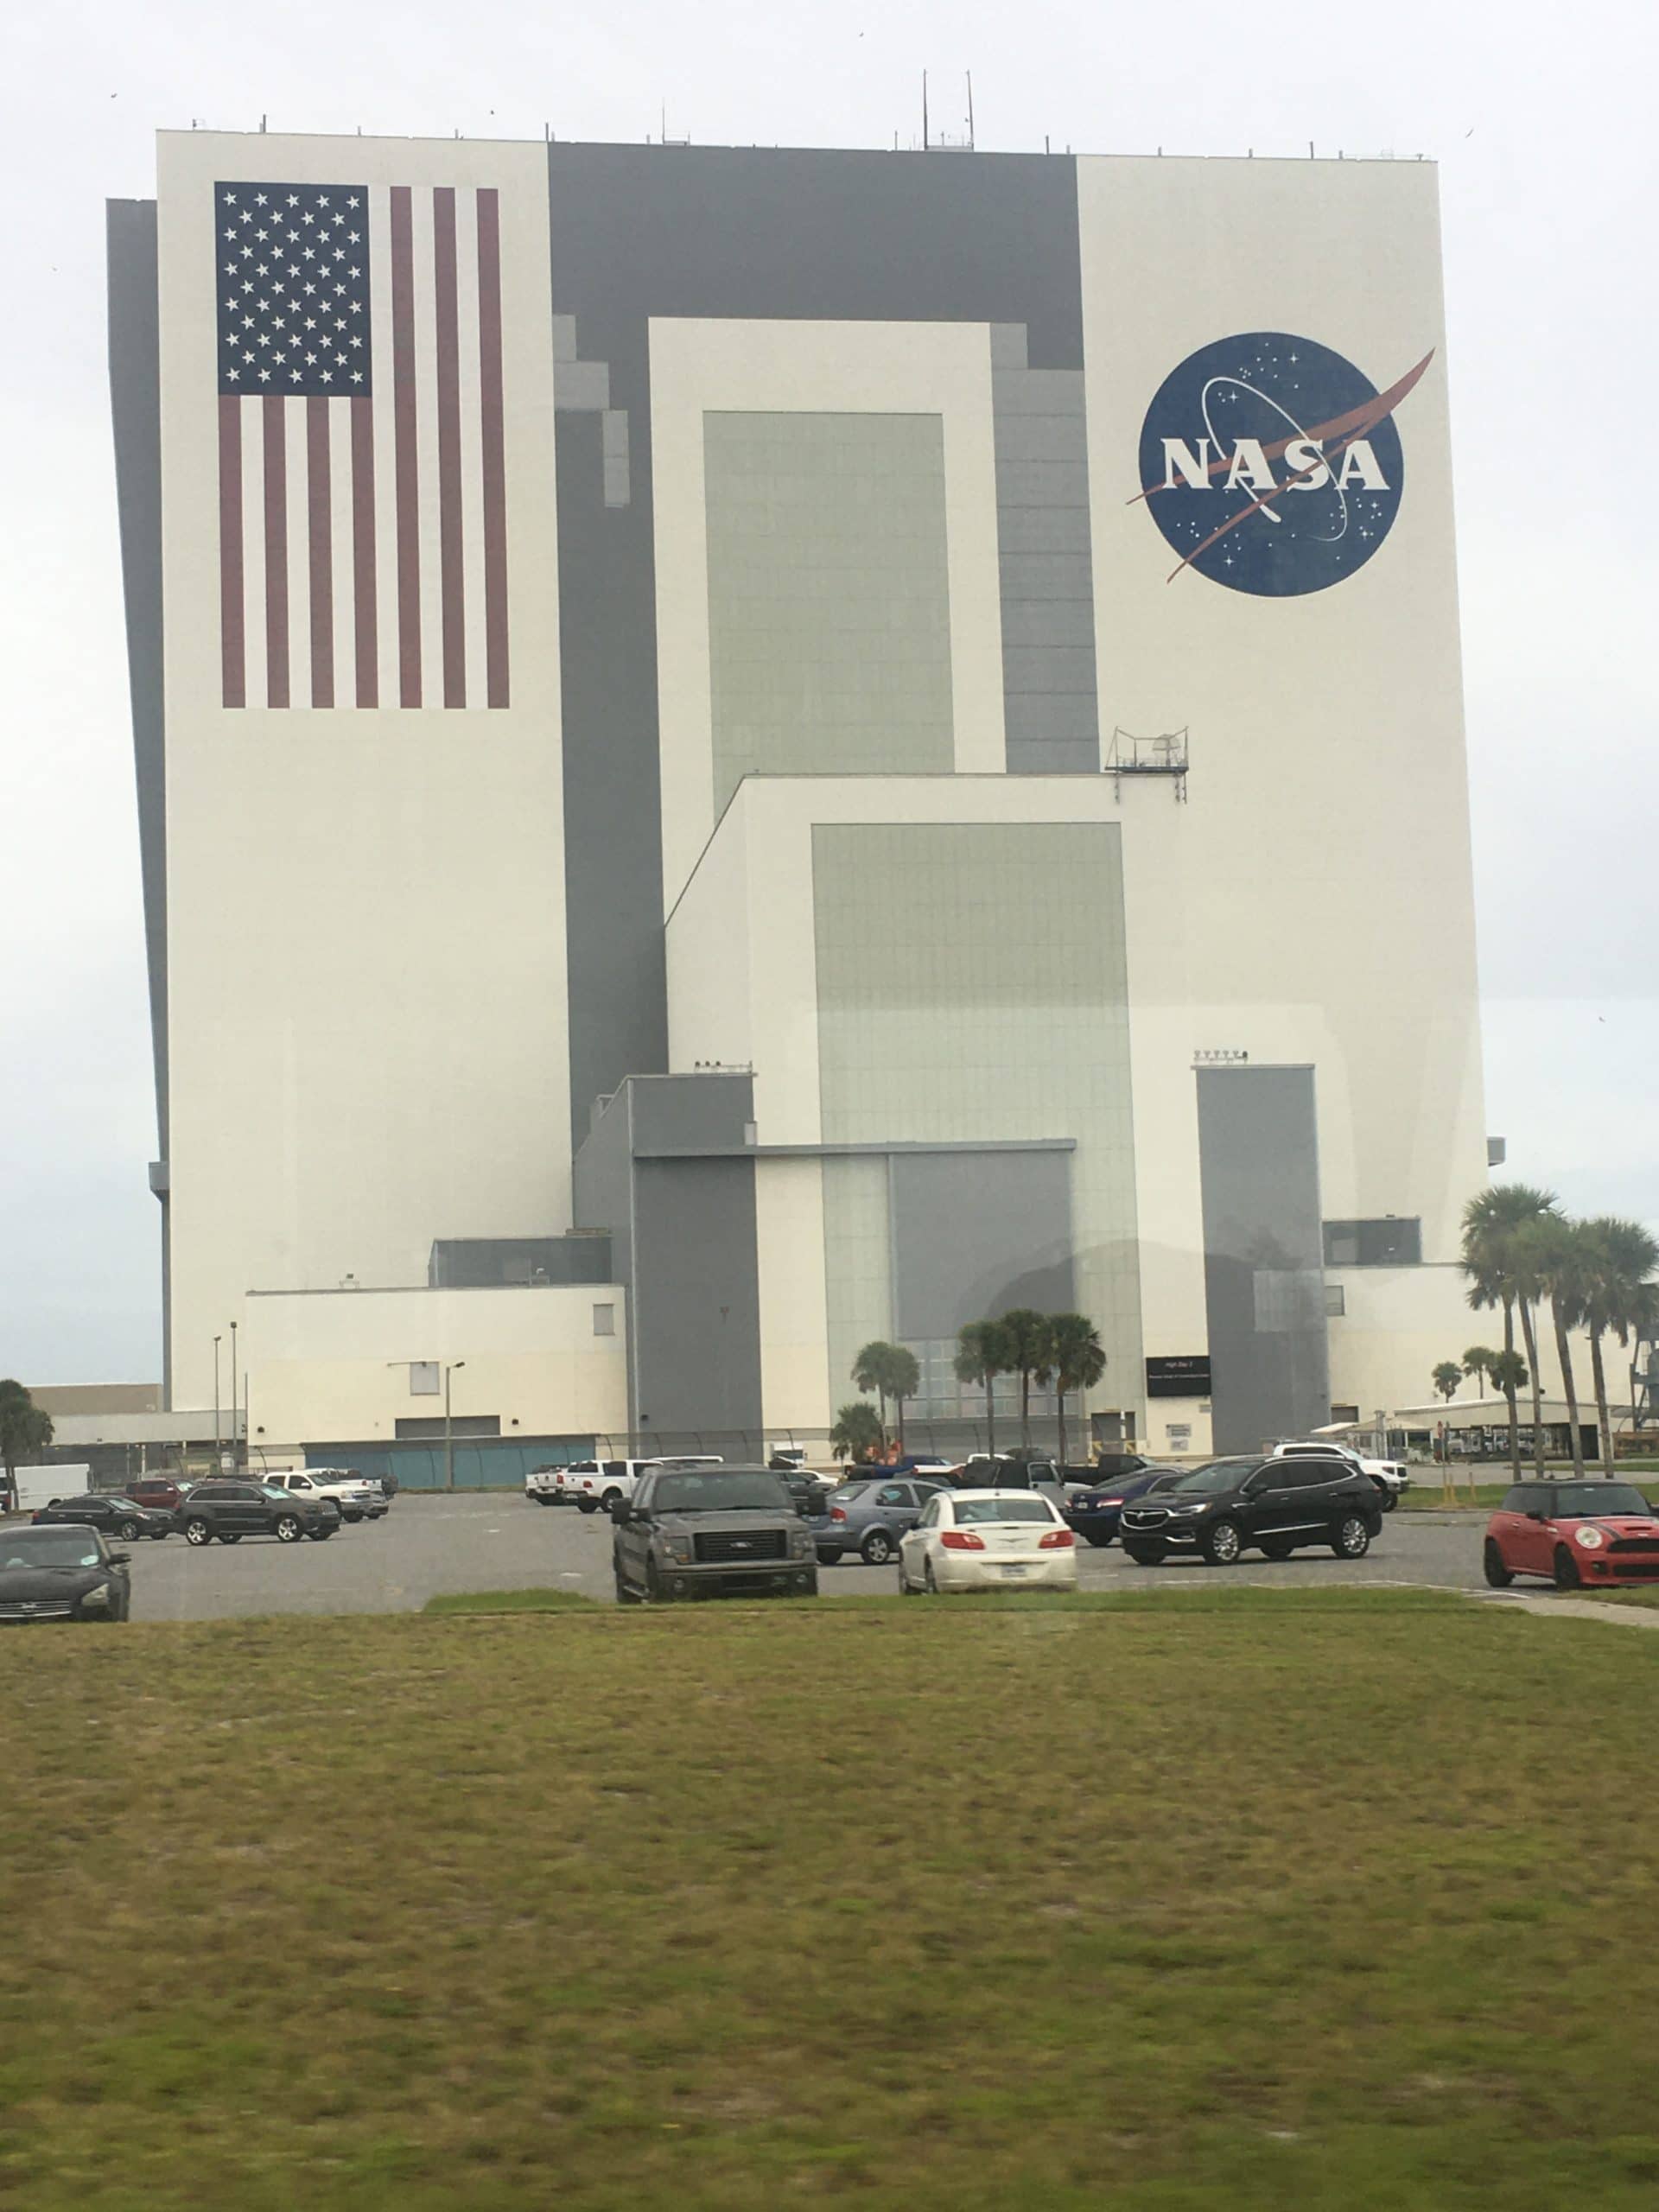 This is the building where the assemble the shuttles and rockets prior to launch.